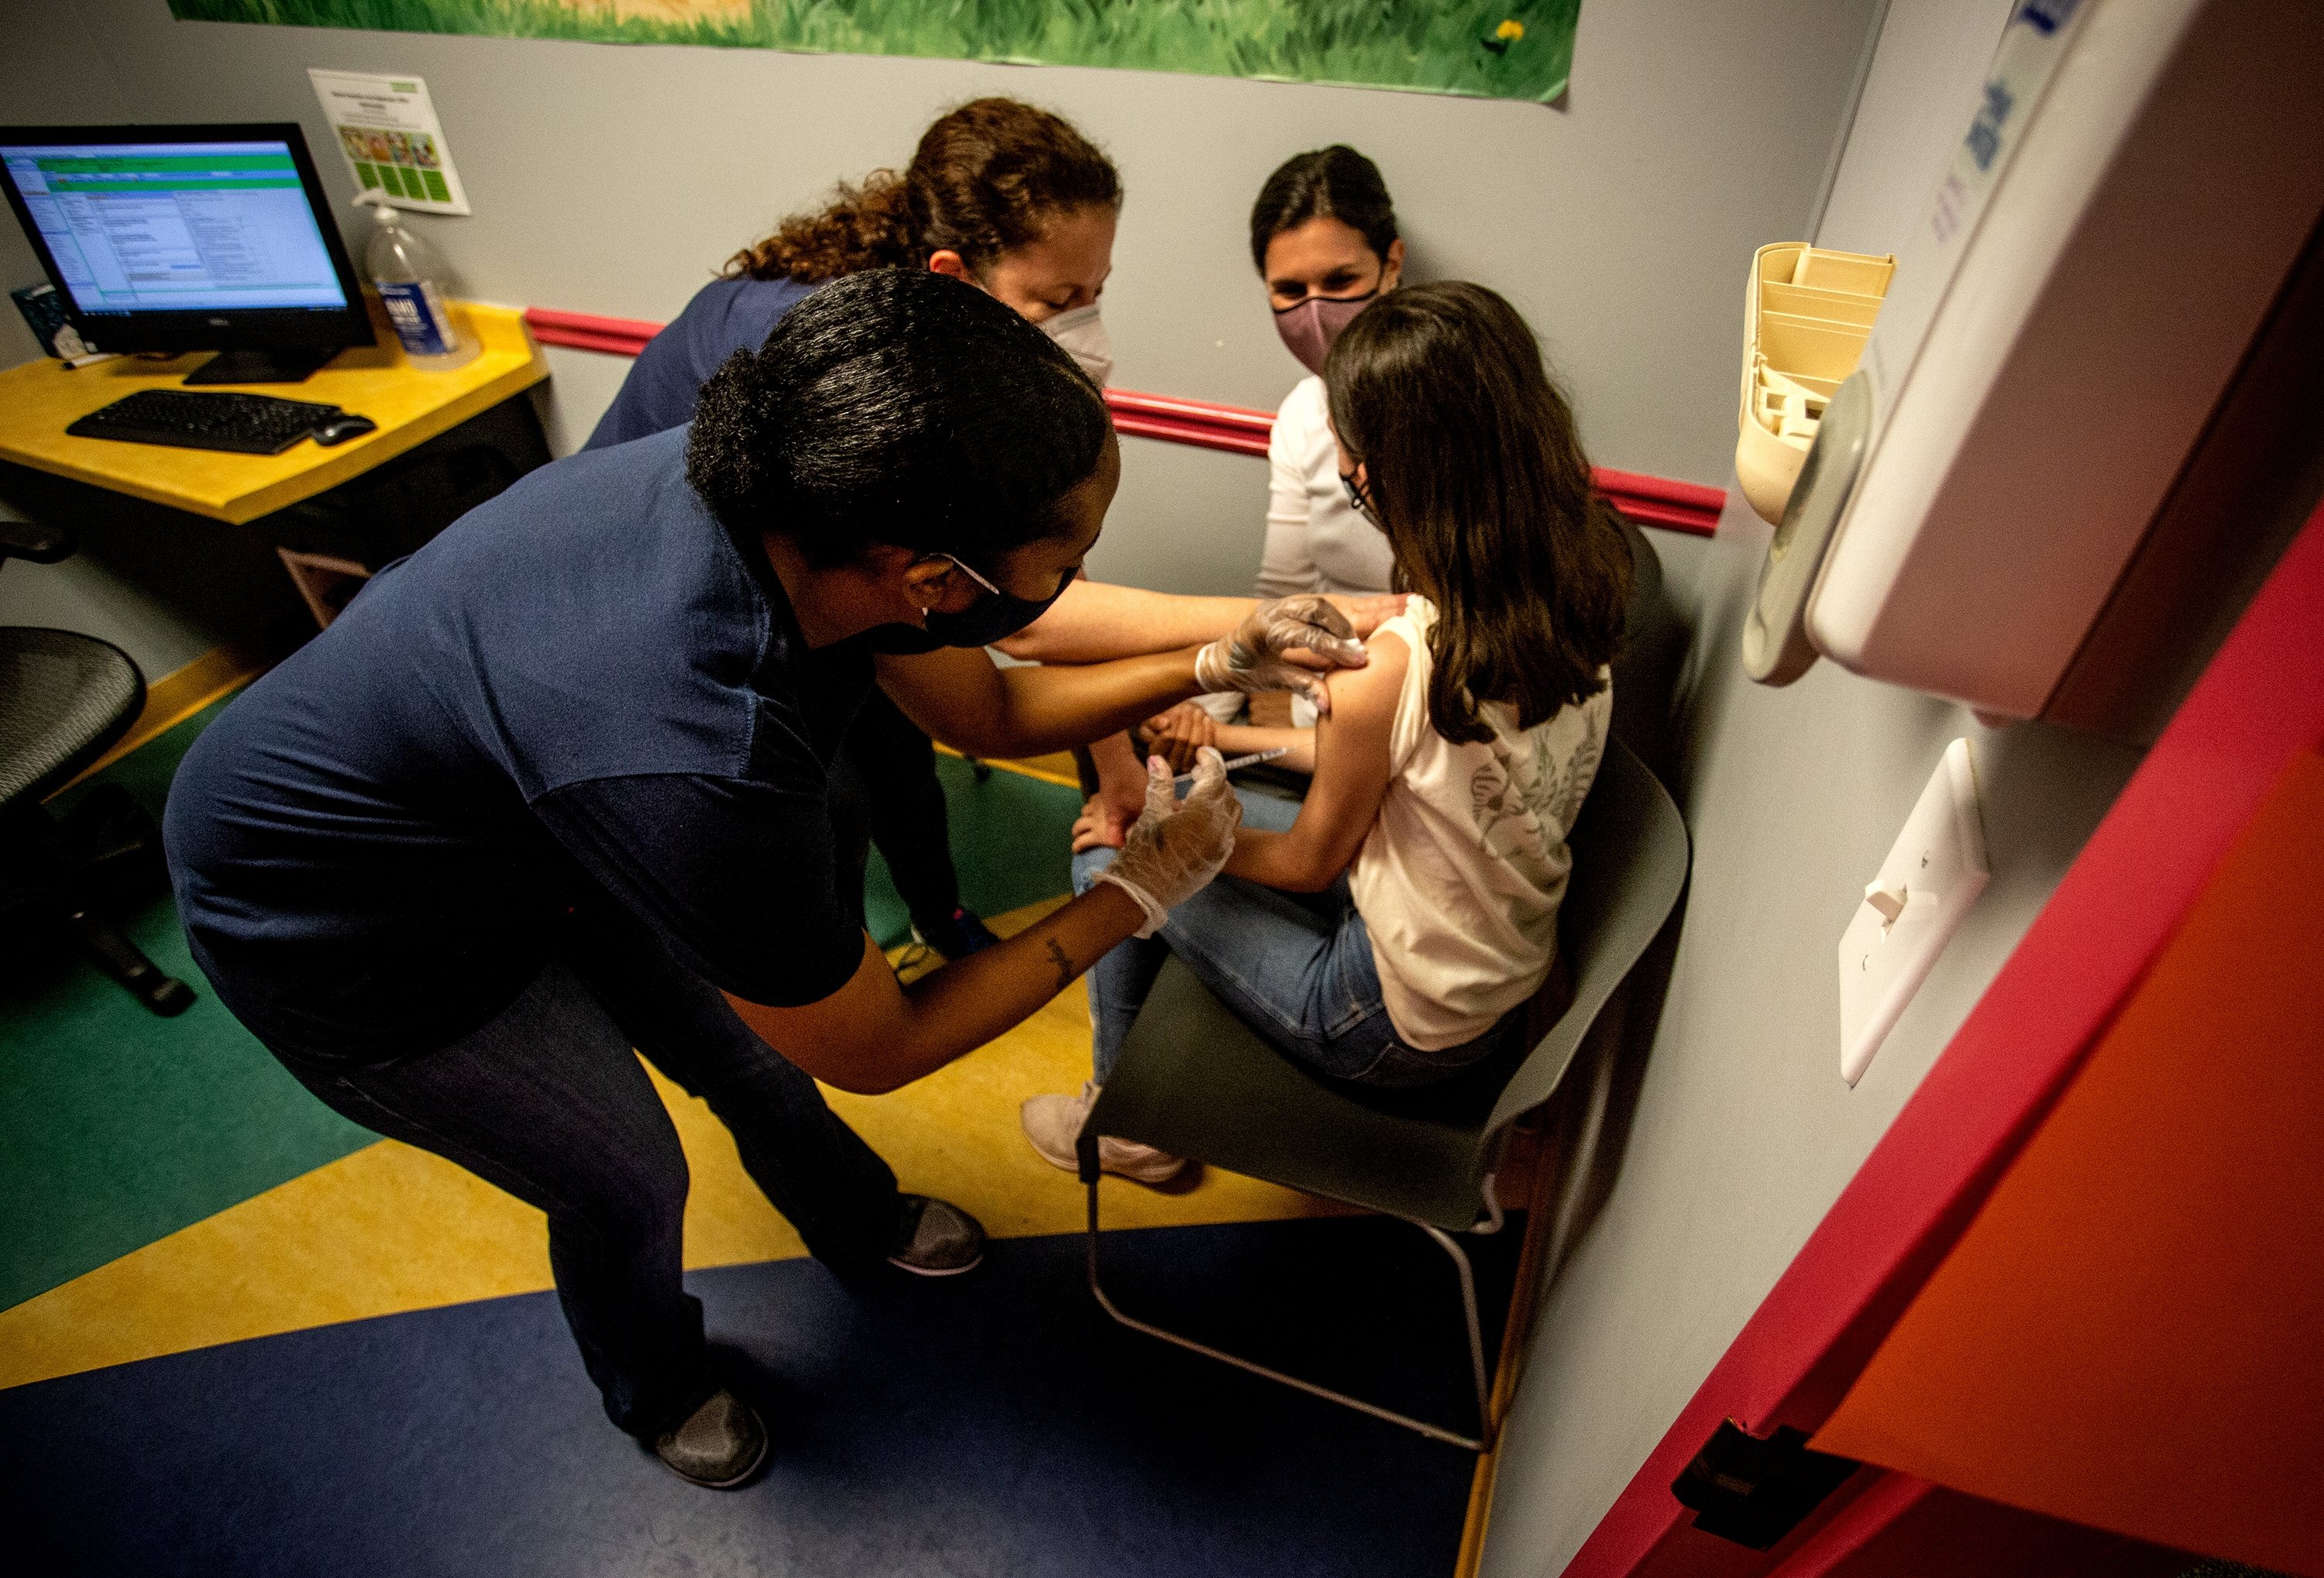 Middle school student Elise Robinson (L) receives her first COVID-19 vaccination in Decatur, Georgia, U.S., May 12, 2021. (AP Photo)